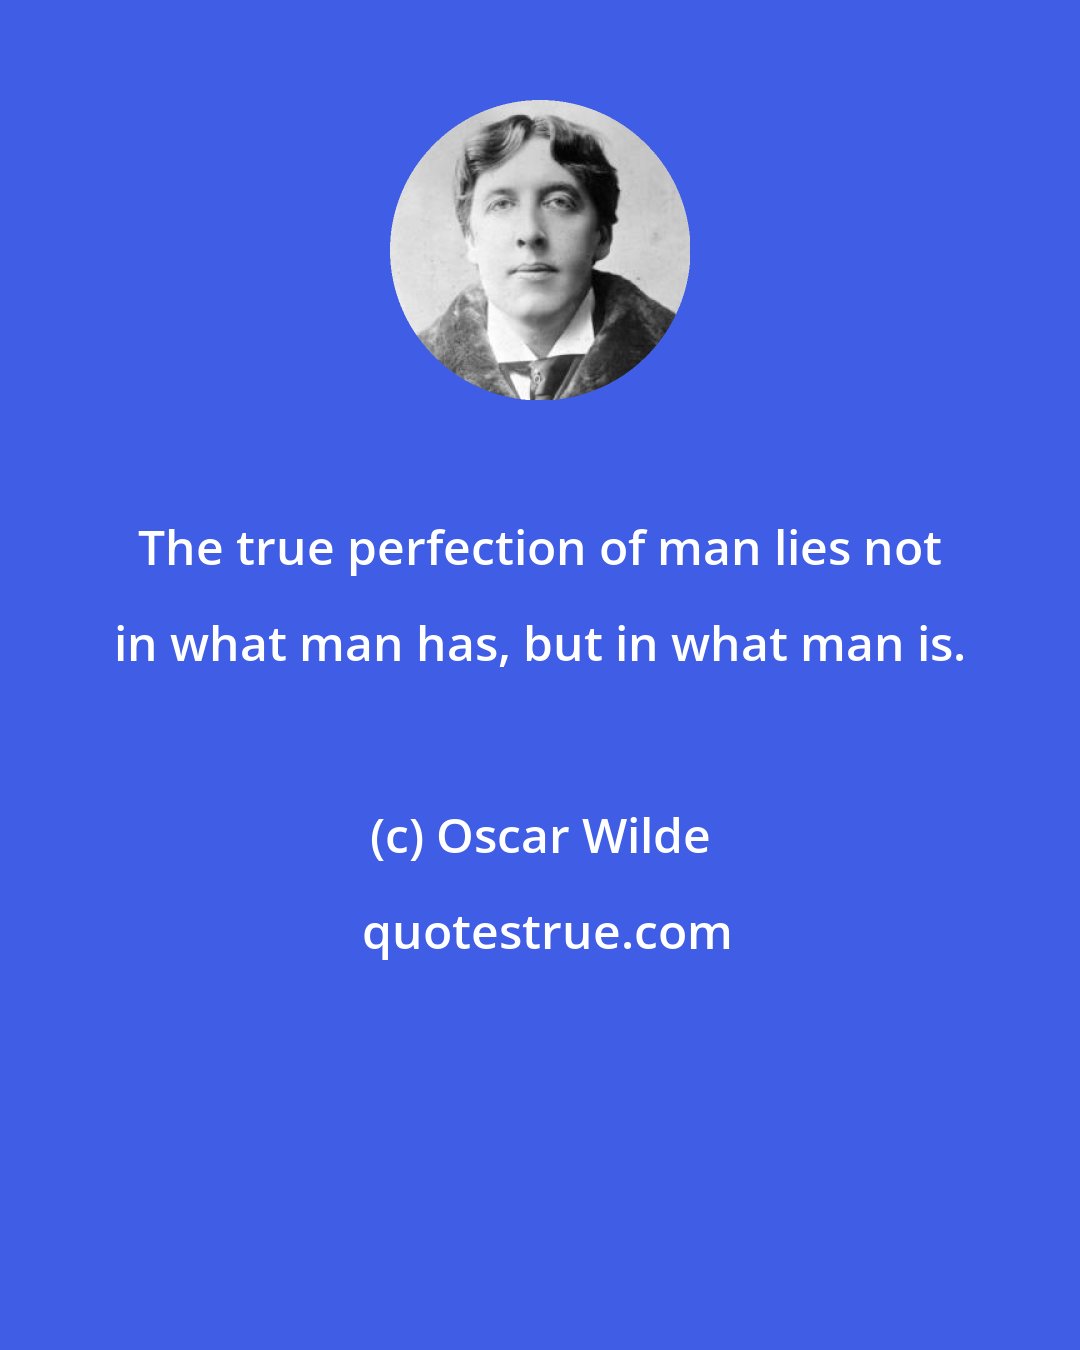 Oscar Wilde: The true perfection of man lies not in what man has, but in what man is.